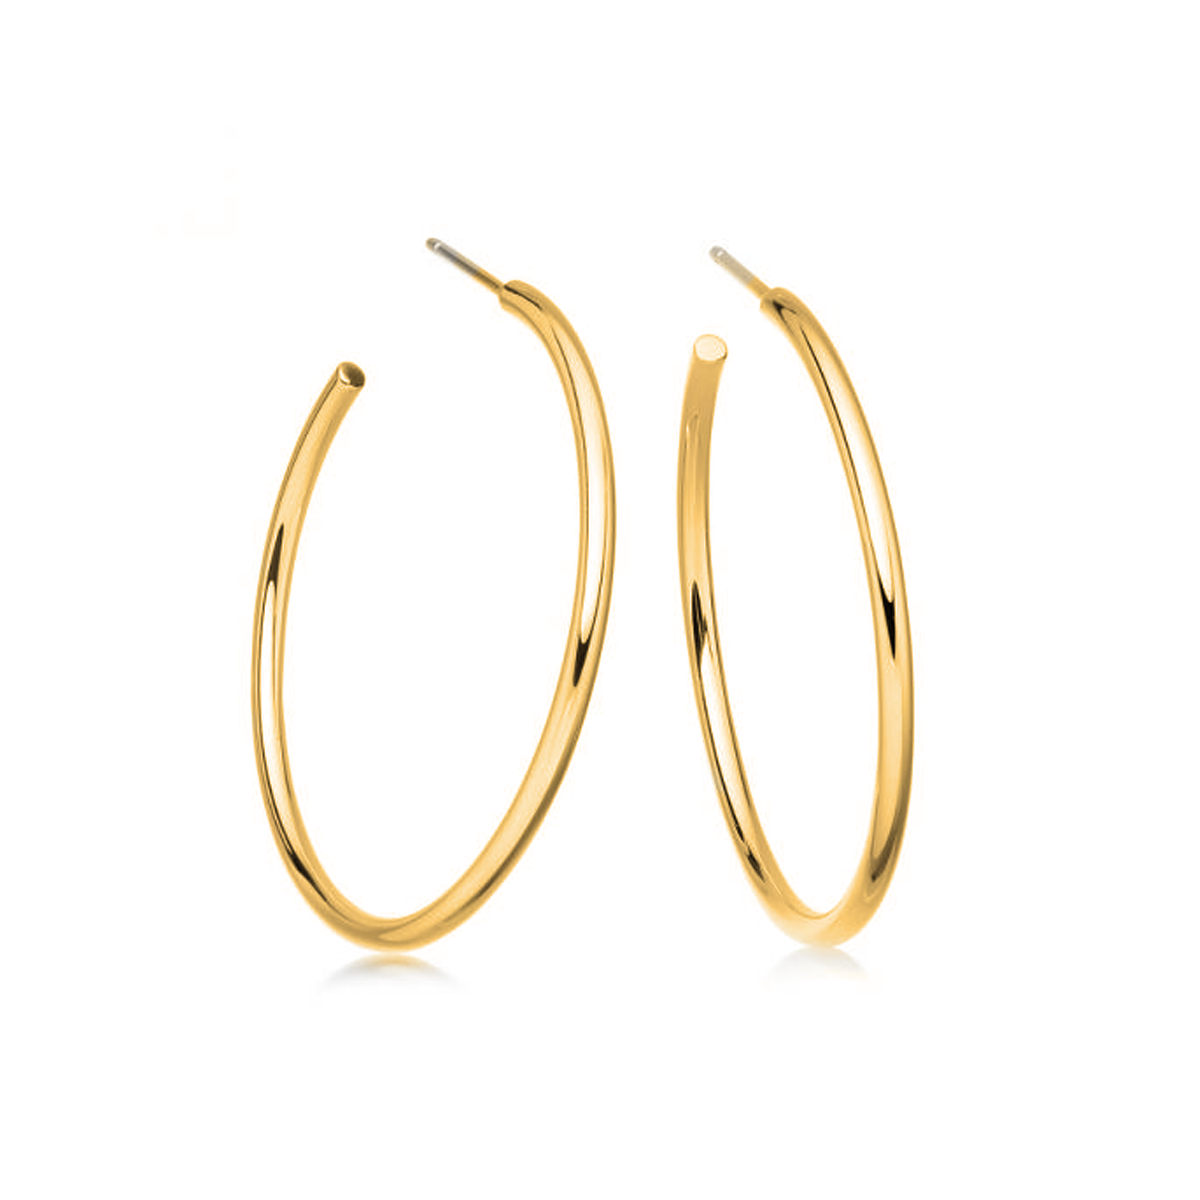 Gold Plated and Silver Hoop Earrings - 40mm